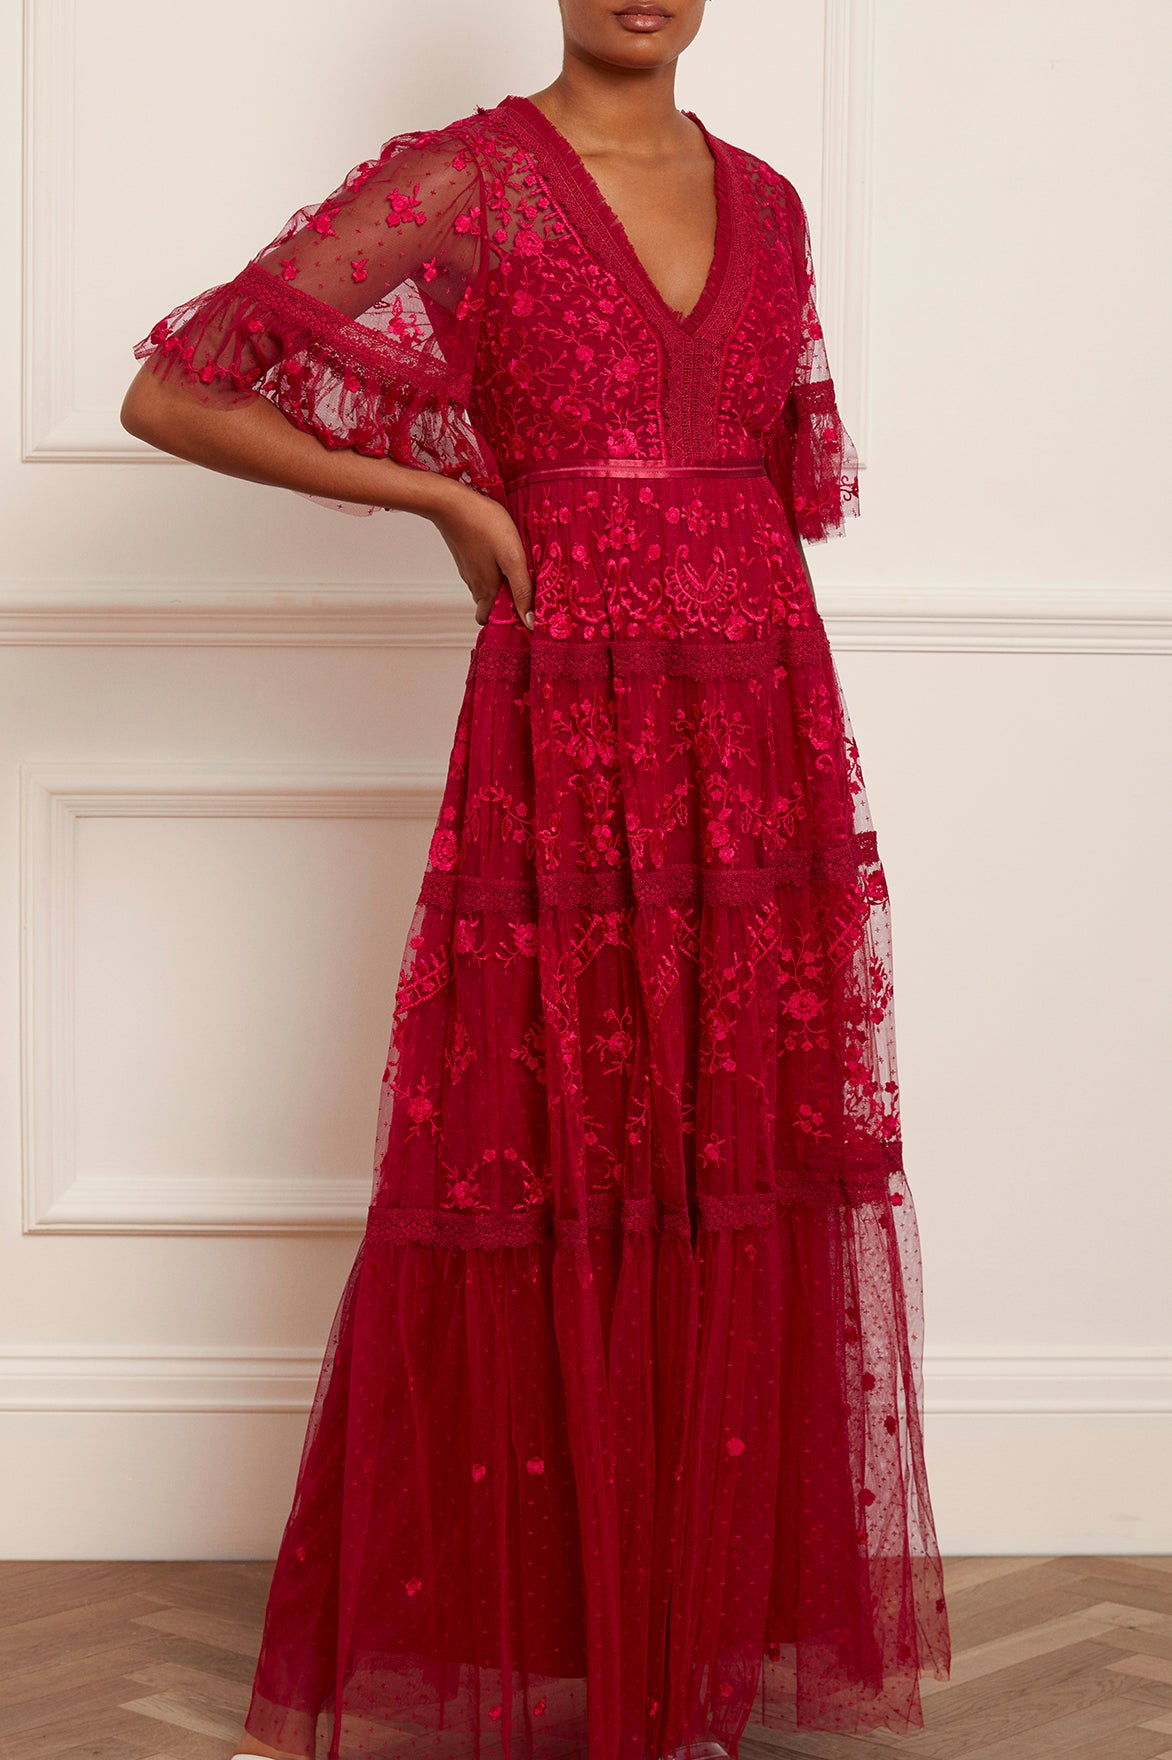 Red Formal Gowns with Lace - June Bridals